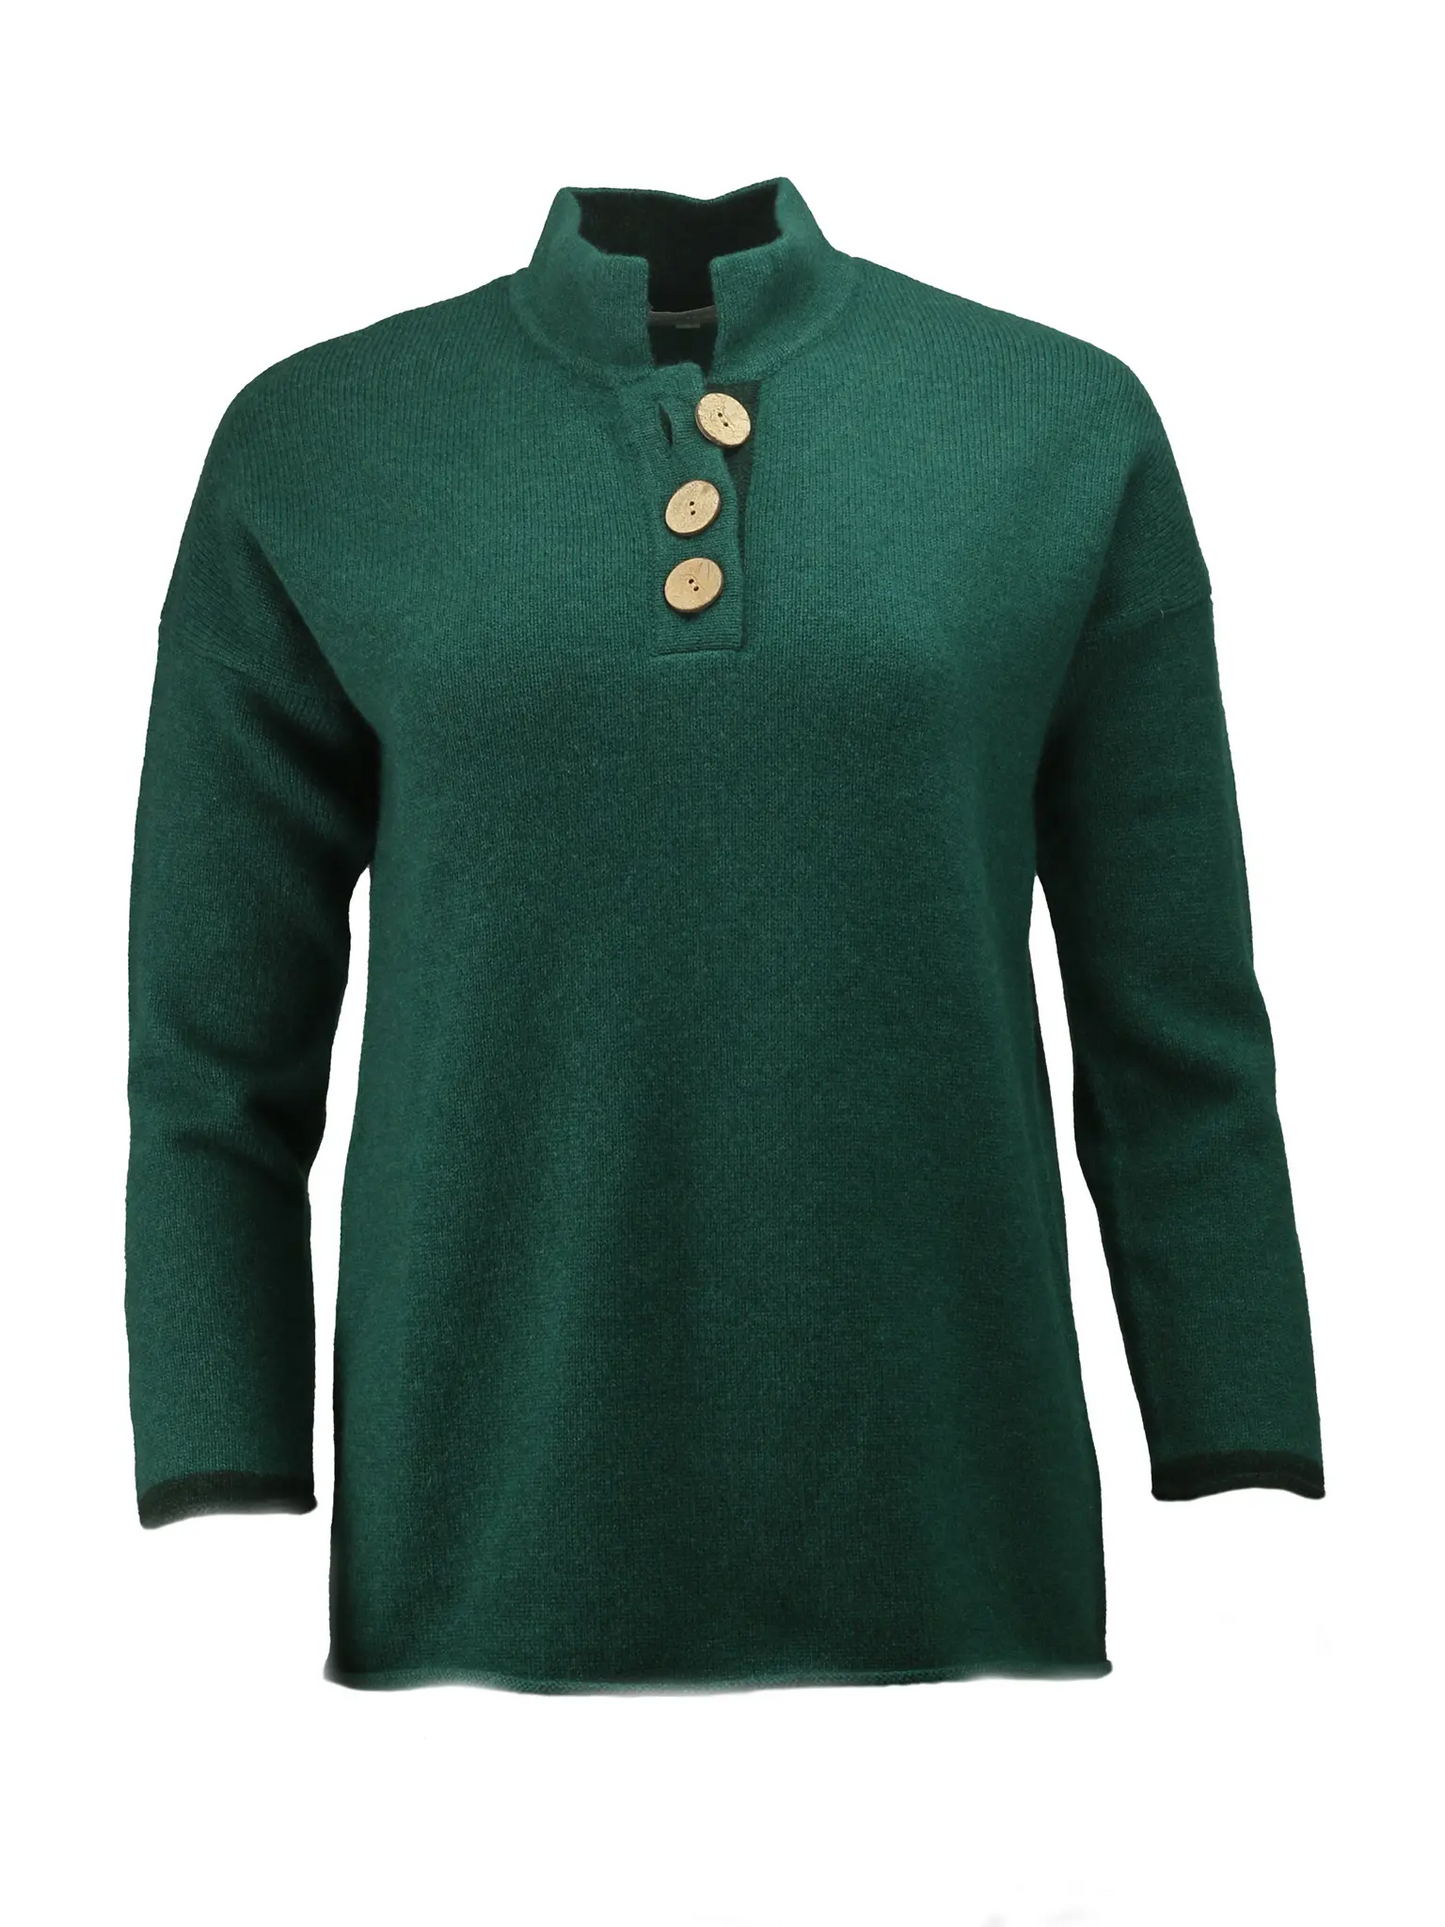 womans high collar jumper in contrast green mytrle with large coconut buttons in boxy fit by misty cashmere